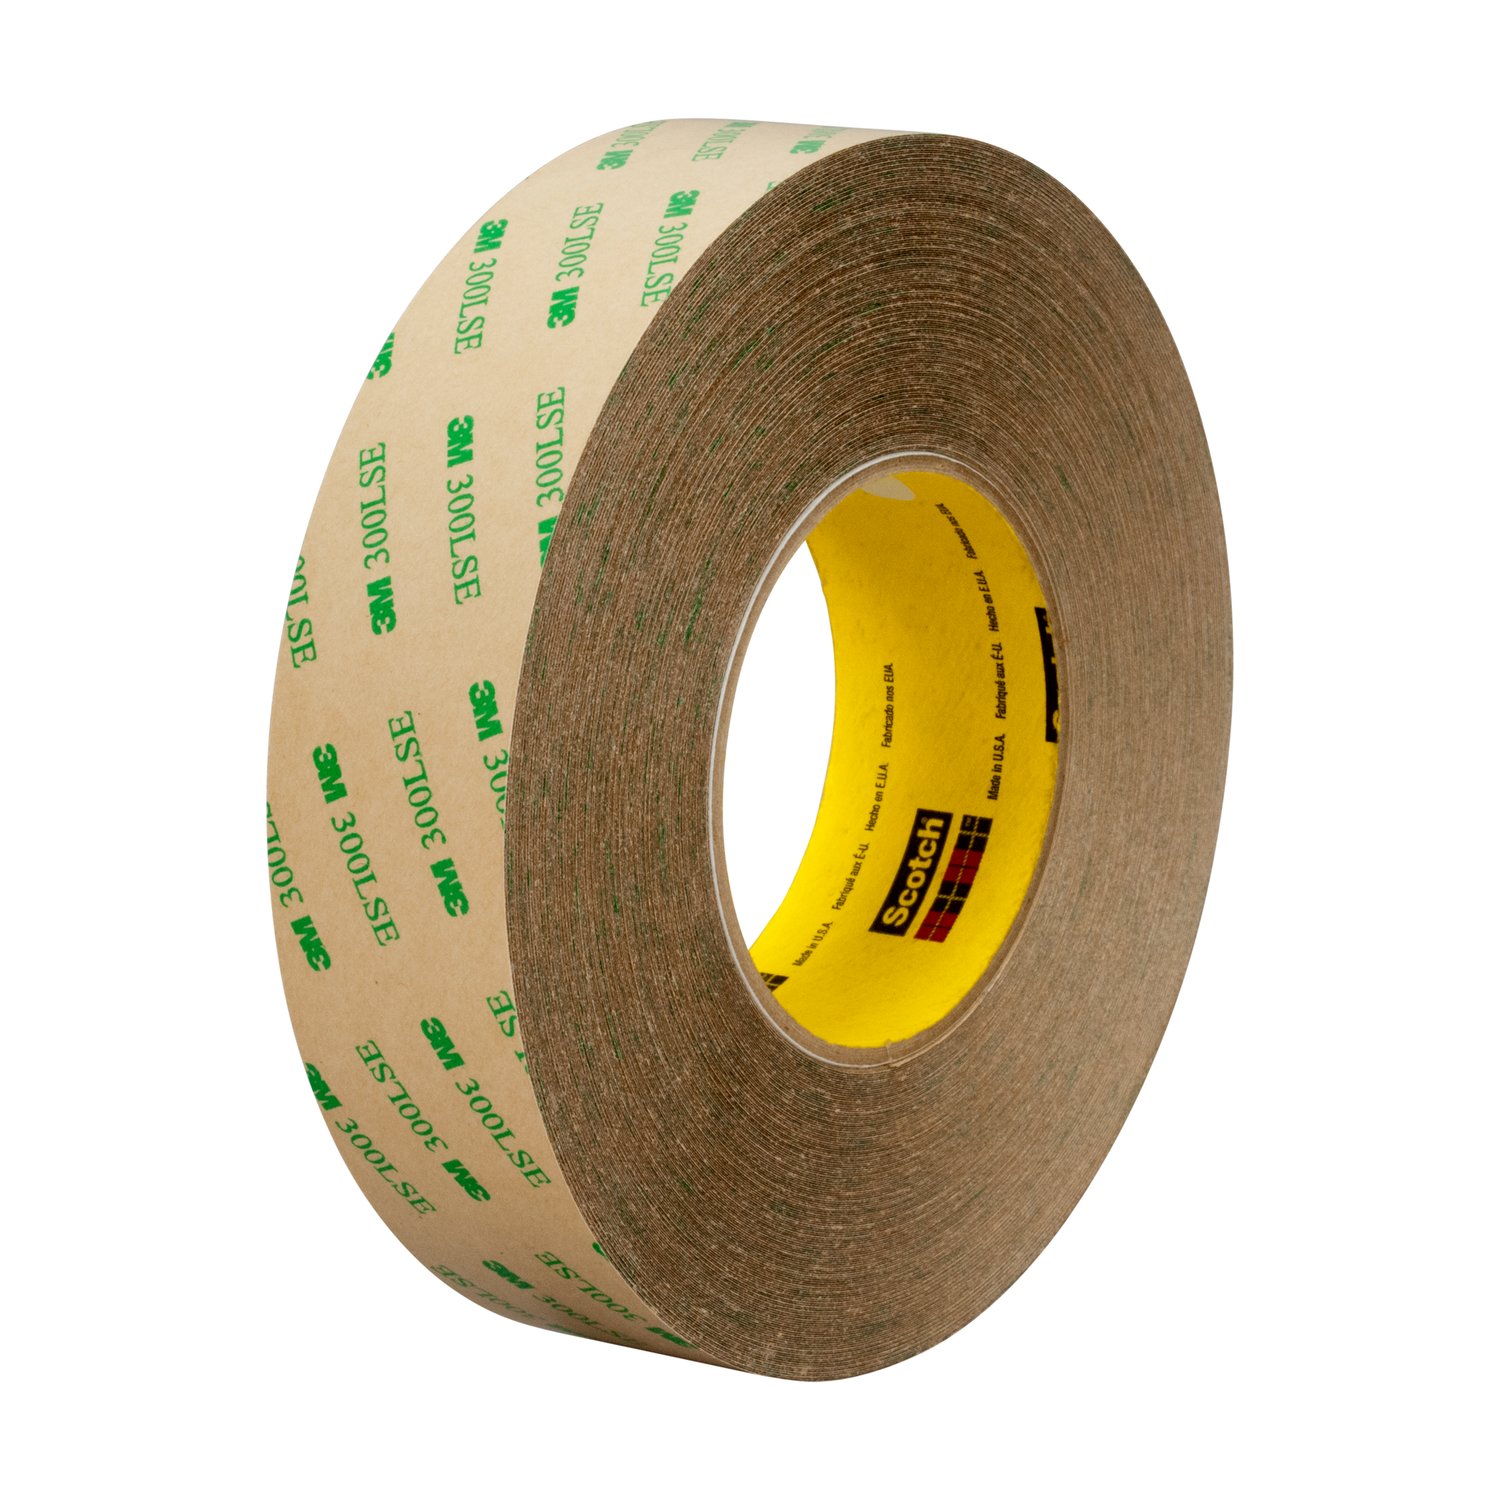 7010376128 - 3M Adhesive Transfer Tape 9672LE, Clear, 12 in x 180 yd, 5 mil, 1 roll
per case